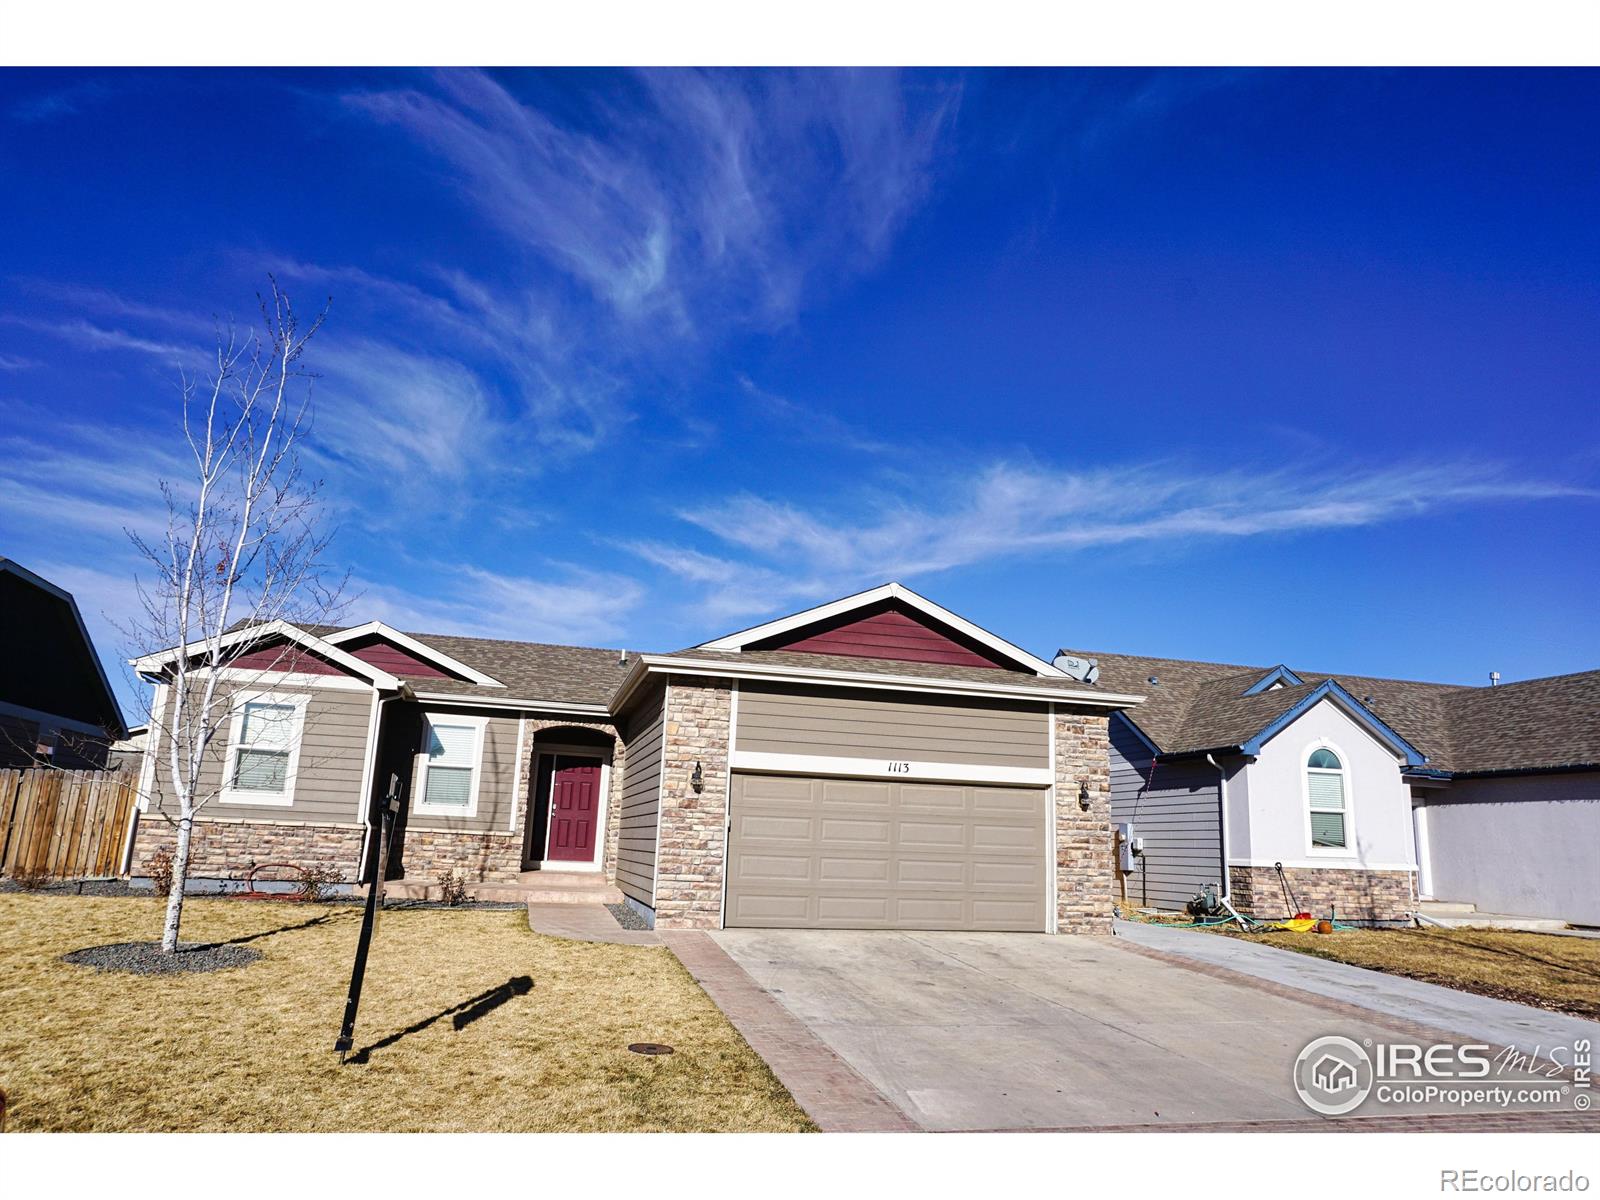 1113 E 25th Street, greeley MLS: 4567891001260 Beds: 3 Baths: 2 Price: $400,000